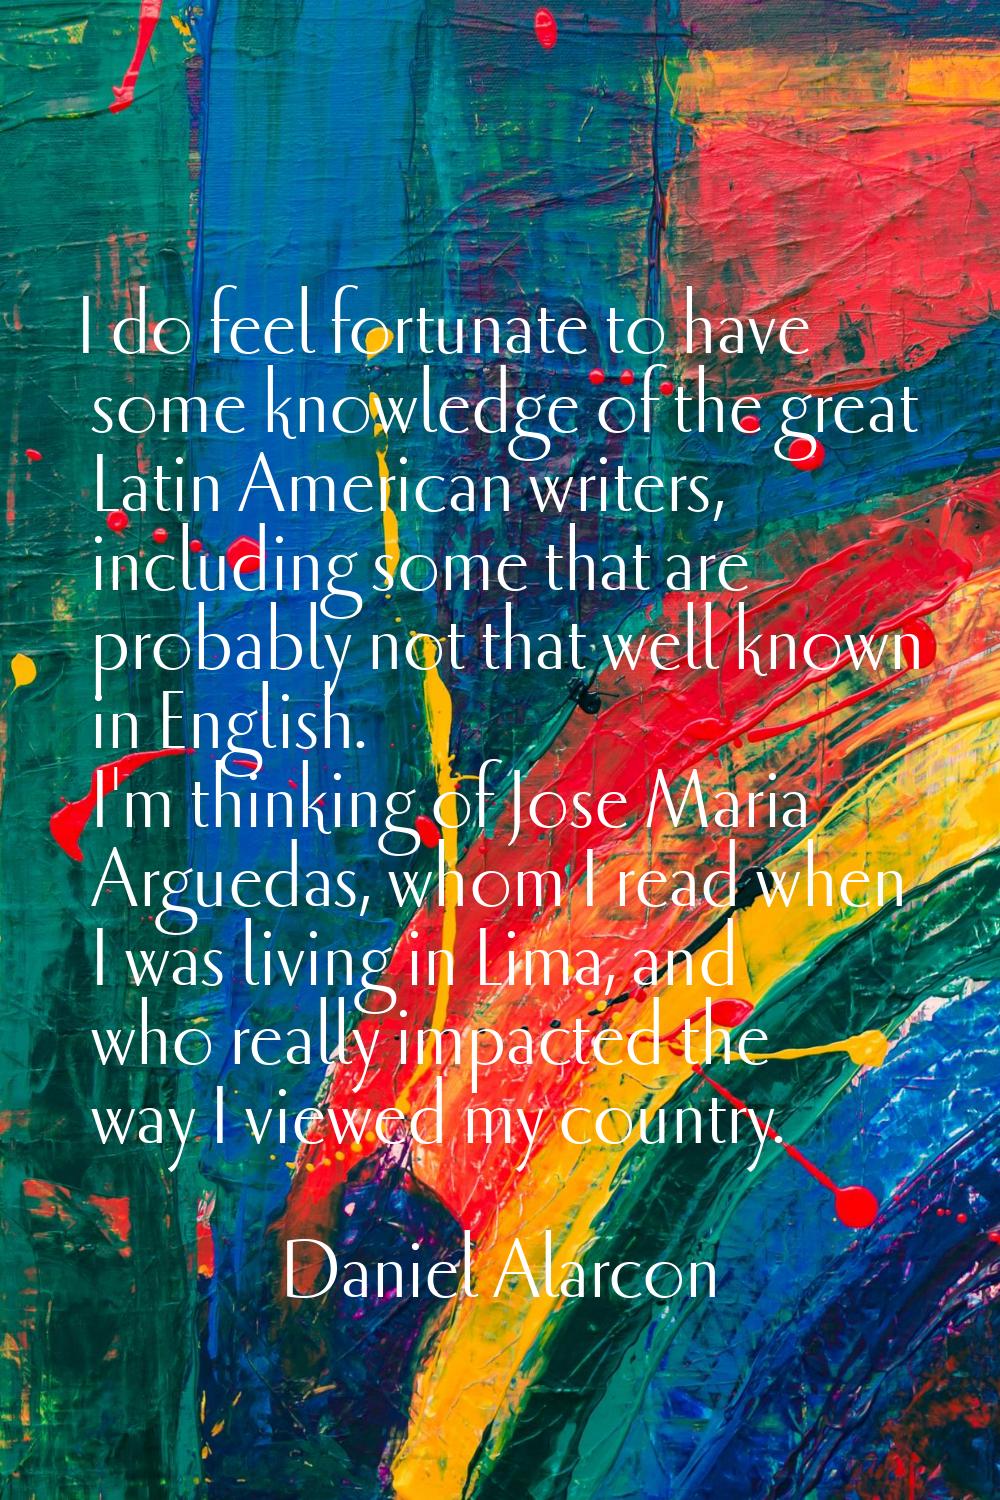 I do feel fortunate to have some knowledge of the great Latin American writers, including some that